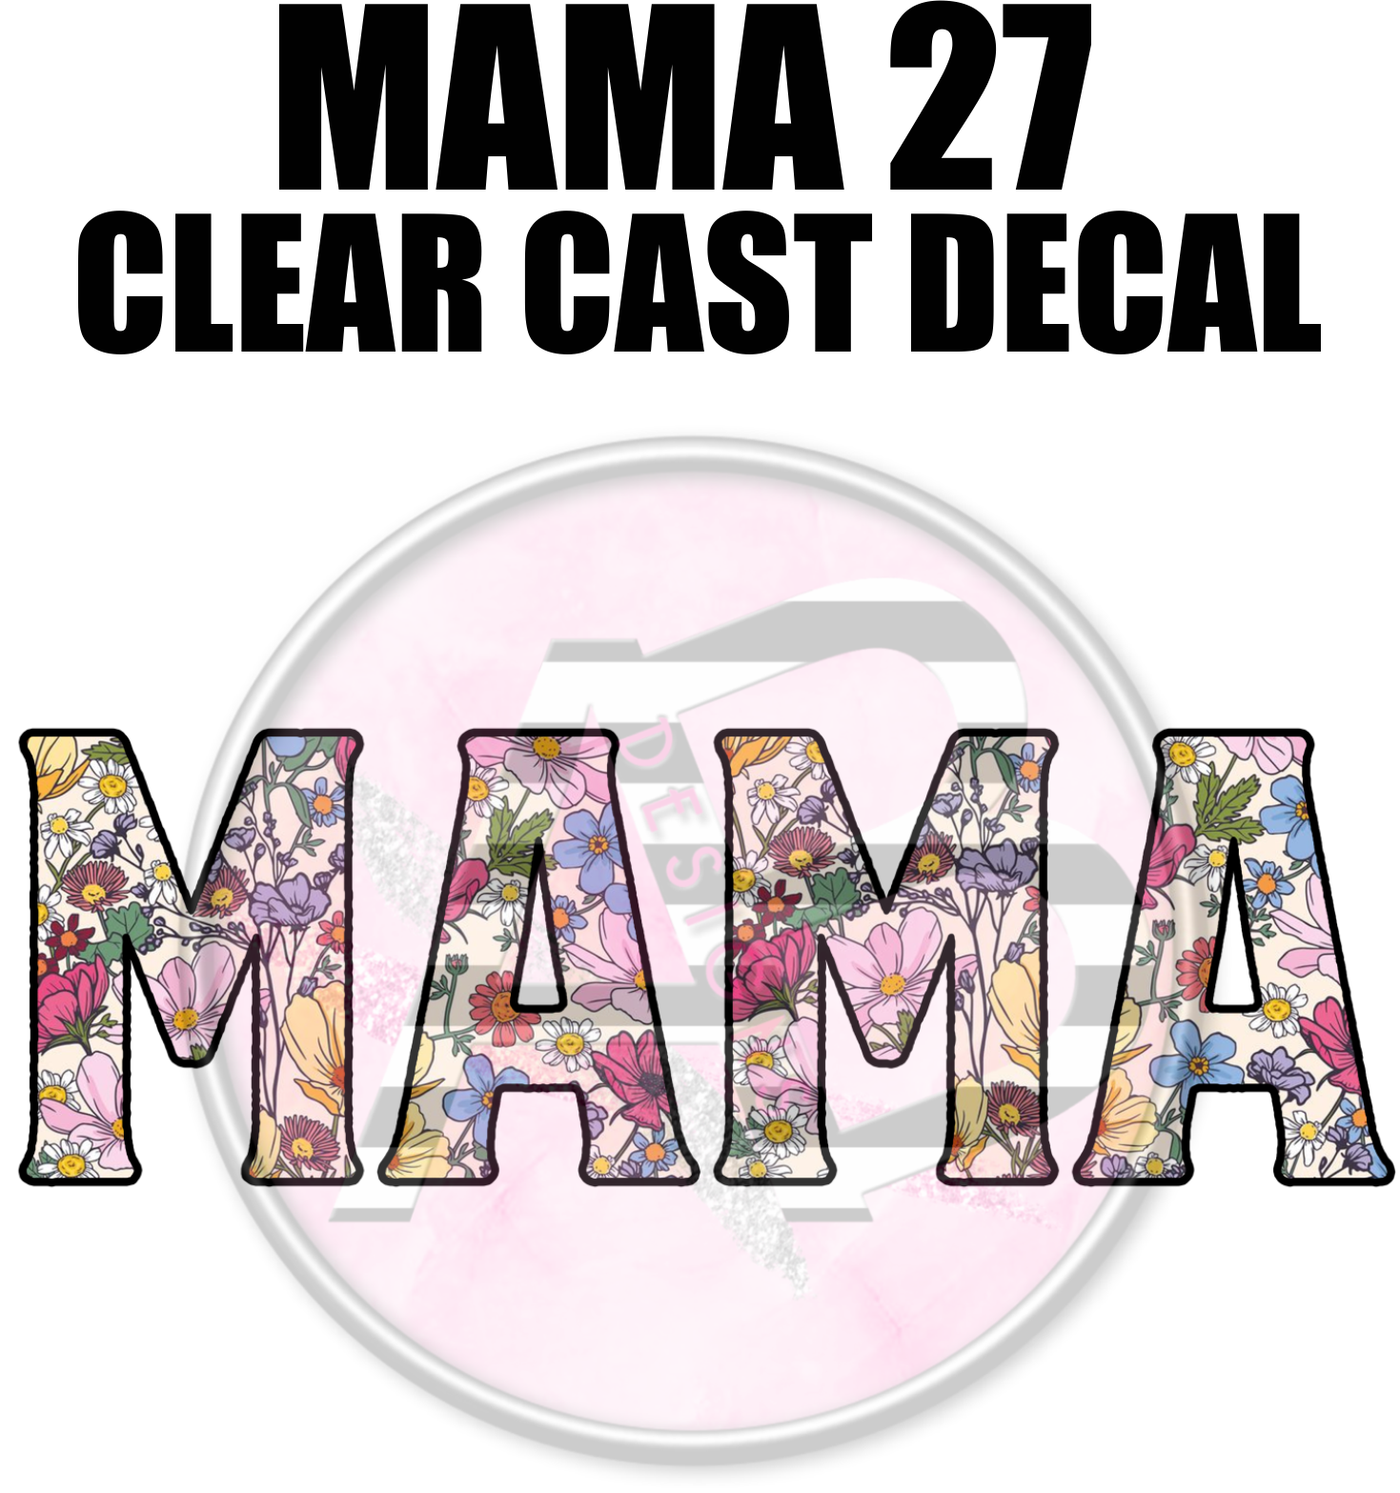 Mama 27 - Clear Cast Decal-552